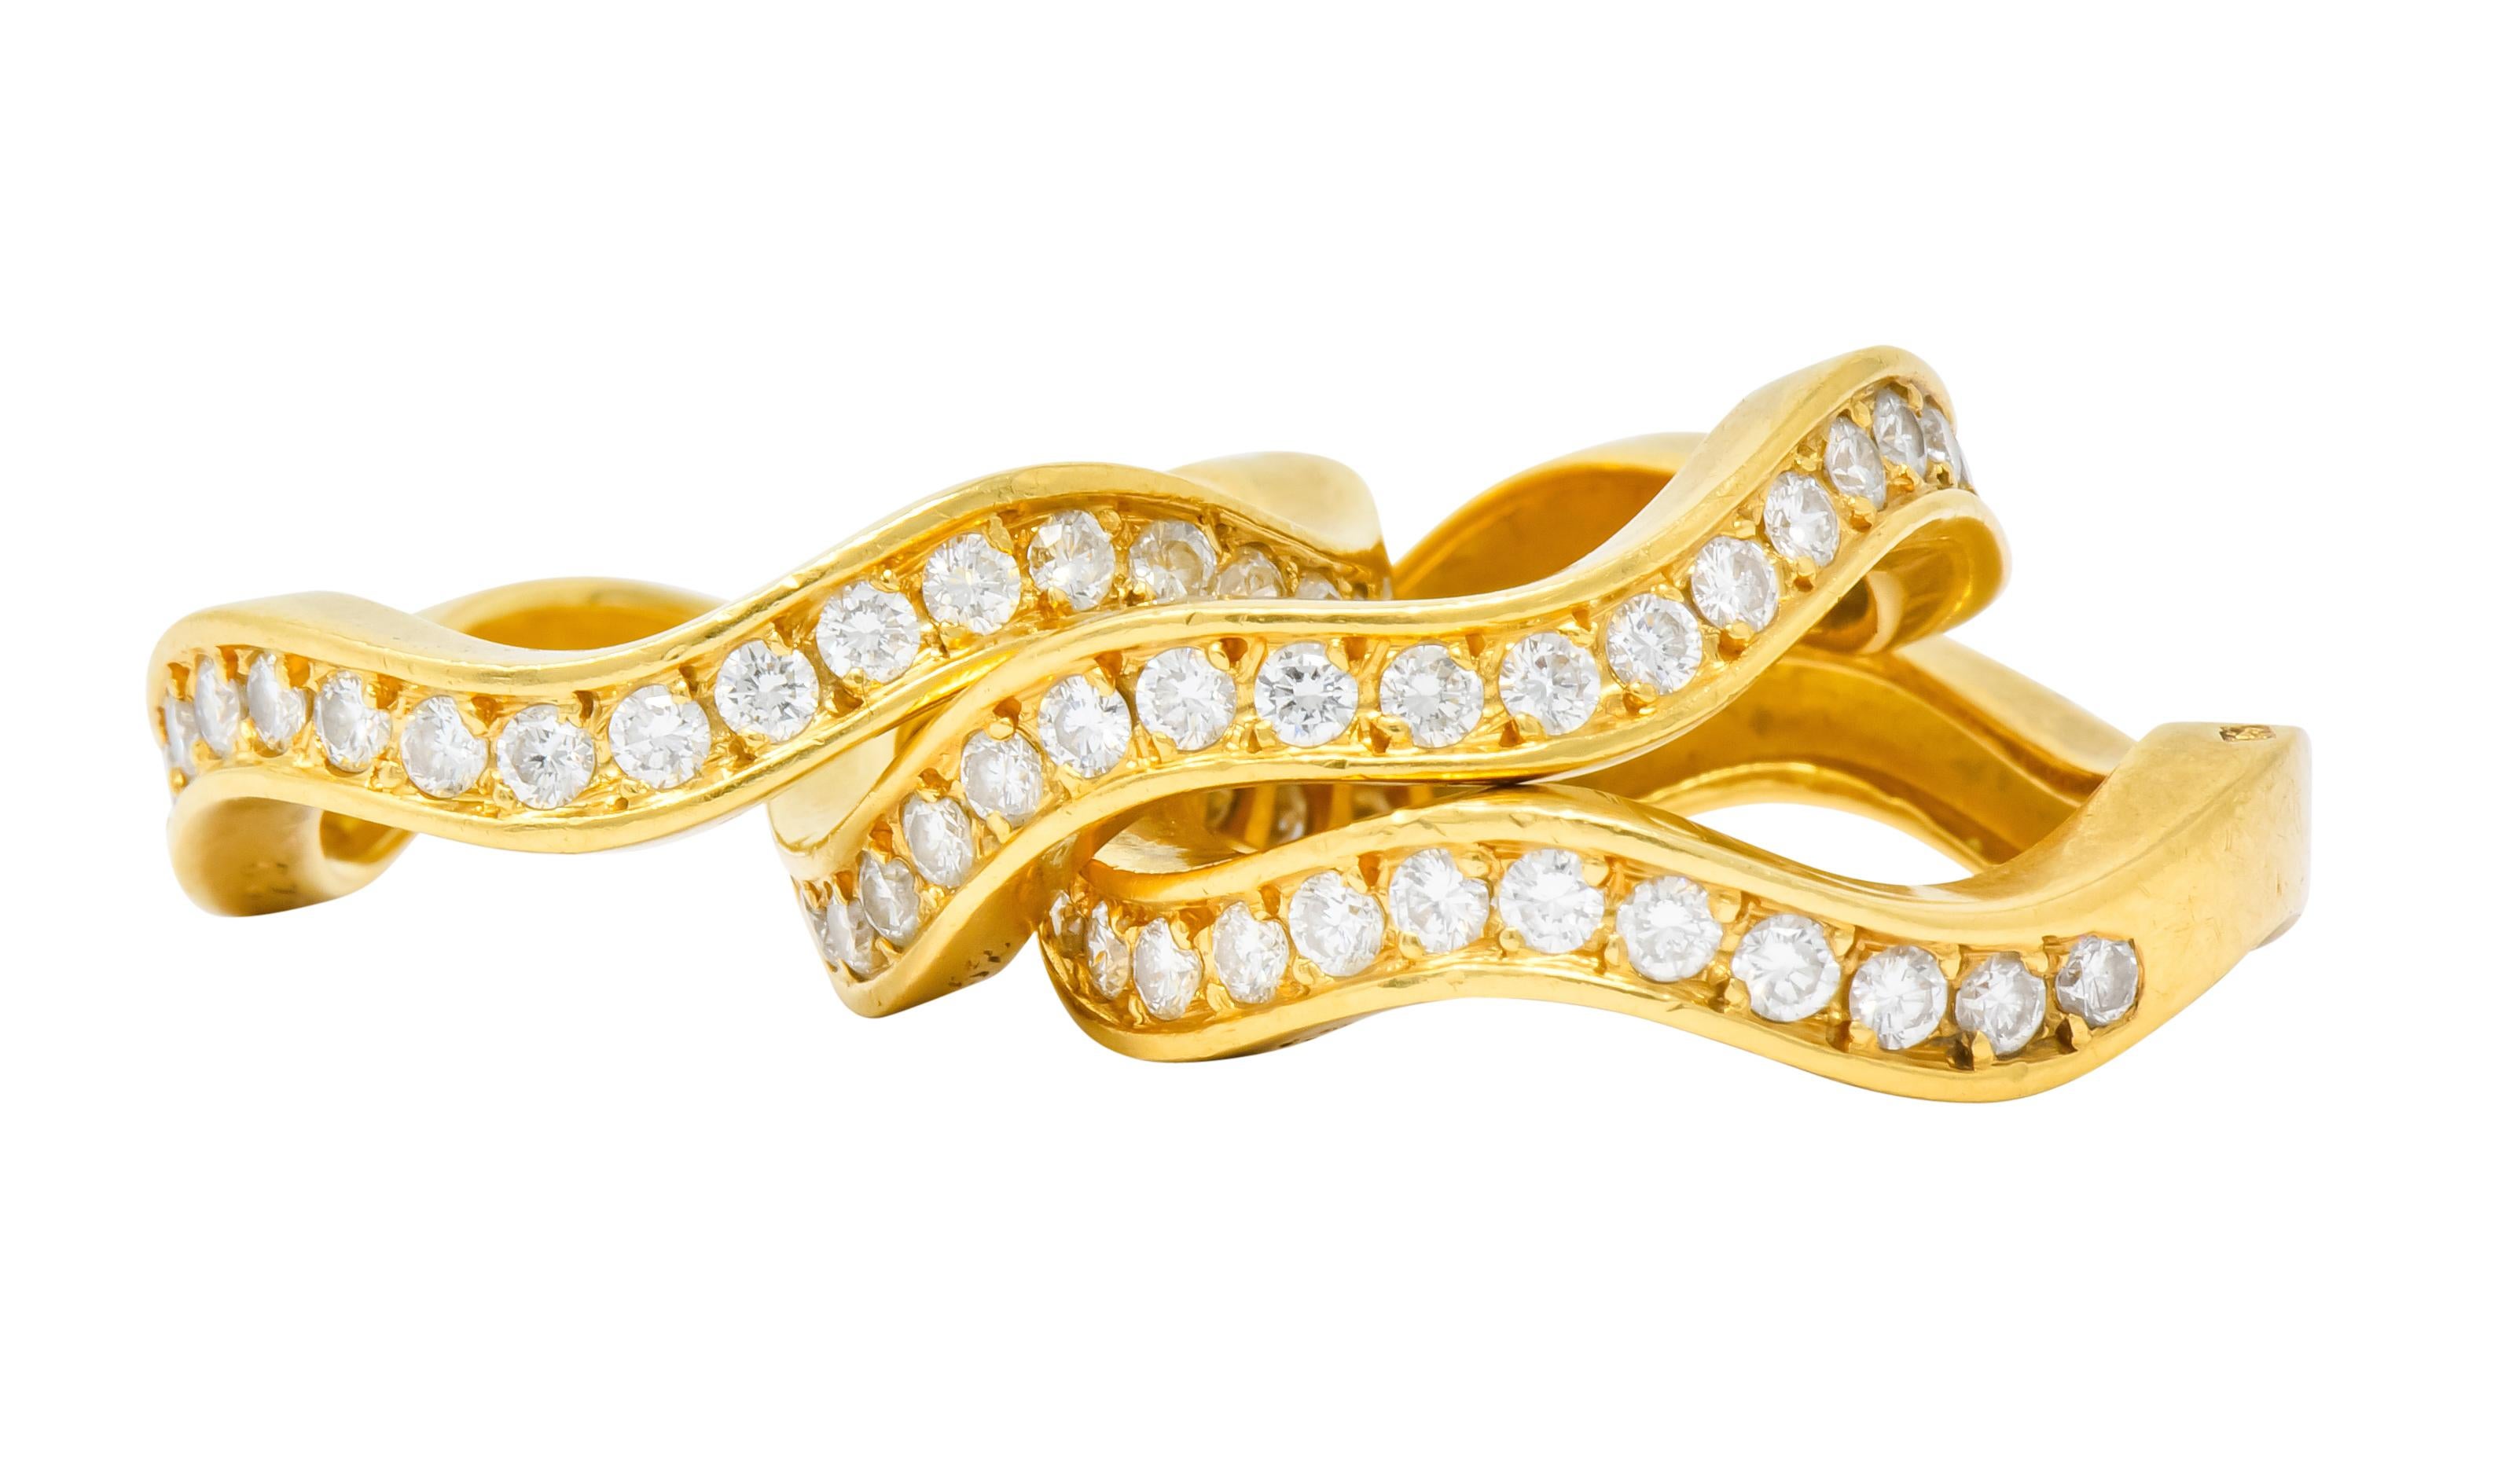 Designed as three waved bands that nest together as a stack, with a matte gold finish

Each set to front with bead set round brilliant cut diamonds weighing approximately 1.56 carats total, F/G color and VS clarity

Each fully signed Cartier and